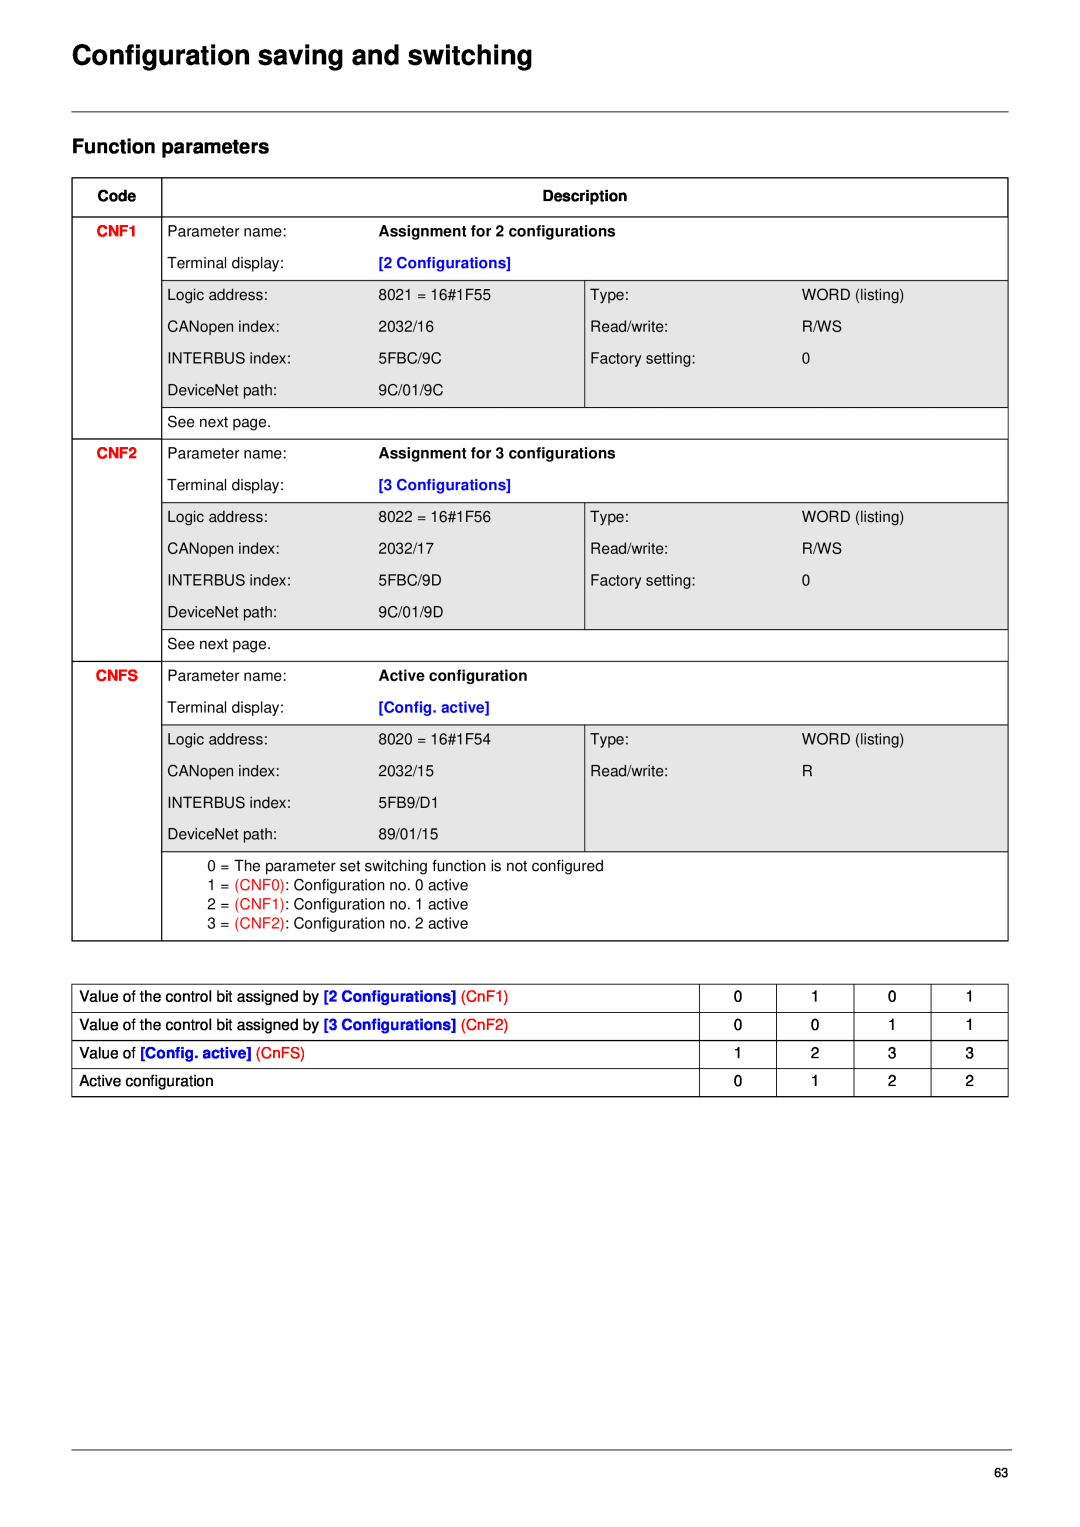 Schneider Electric 61 Function parameters, Configuration saving and switching, Code, Description, Active configuration 